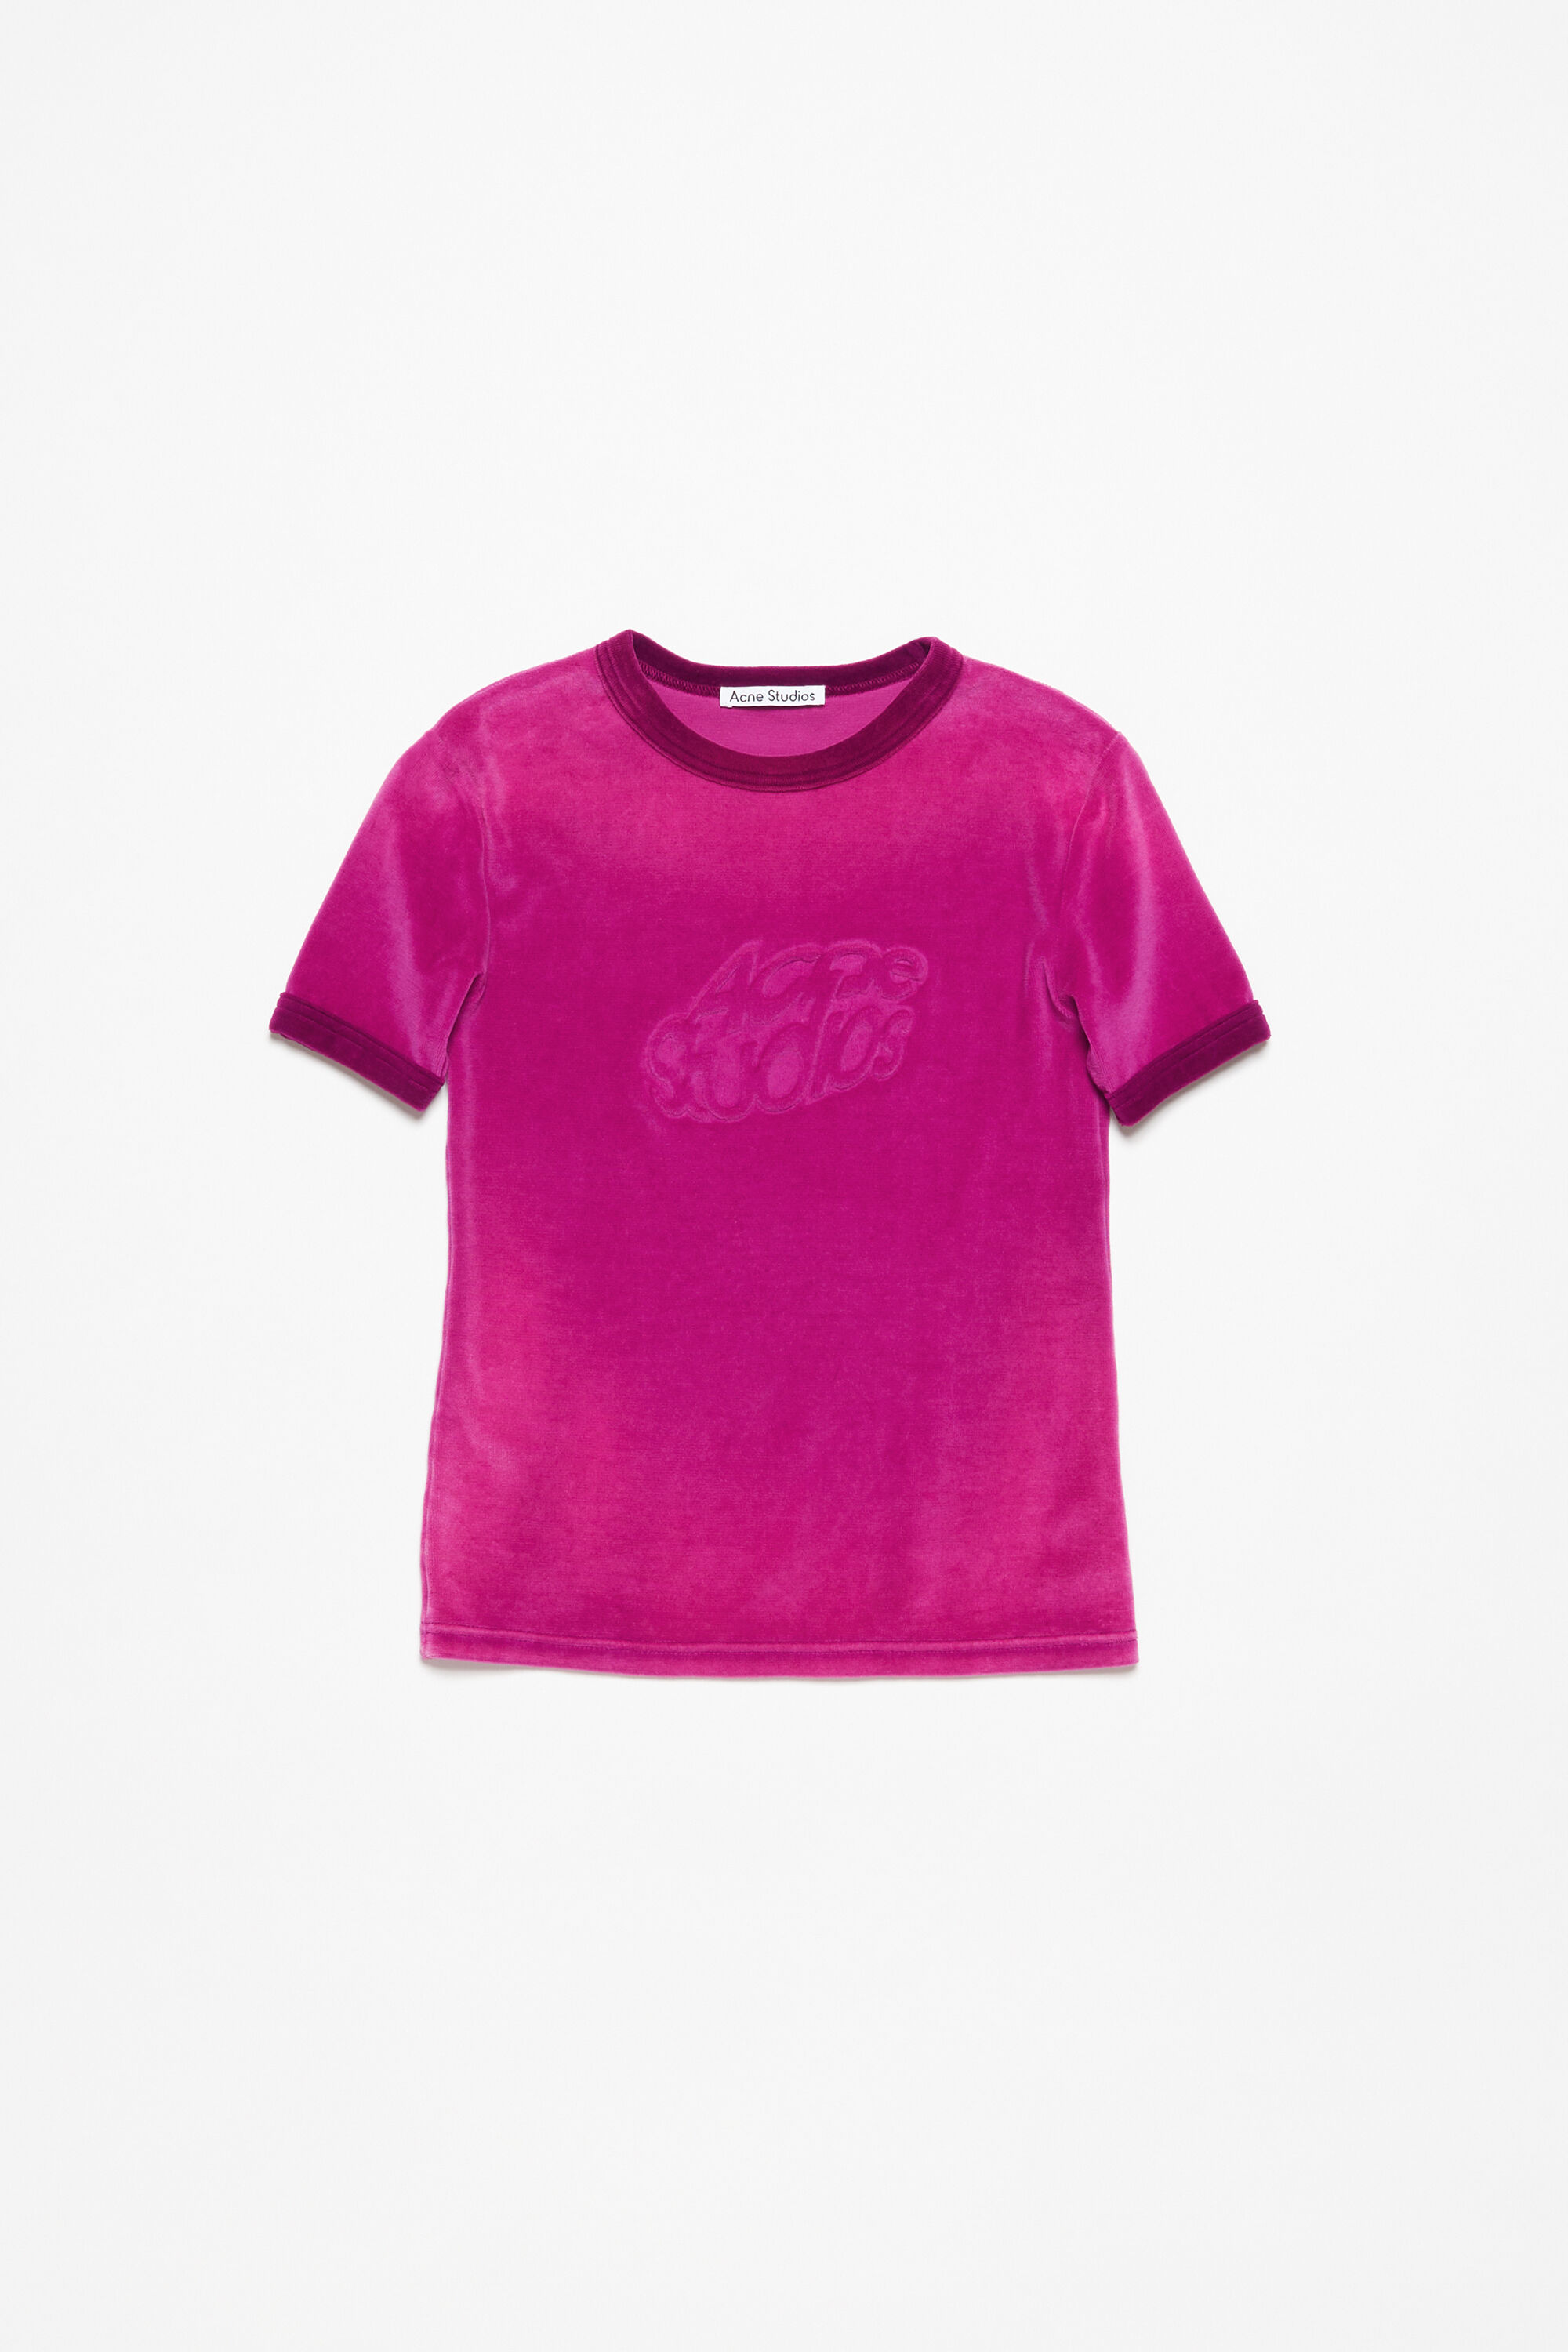 Acne Studios - T-shirt logo - fitted fit - Magenta pink